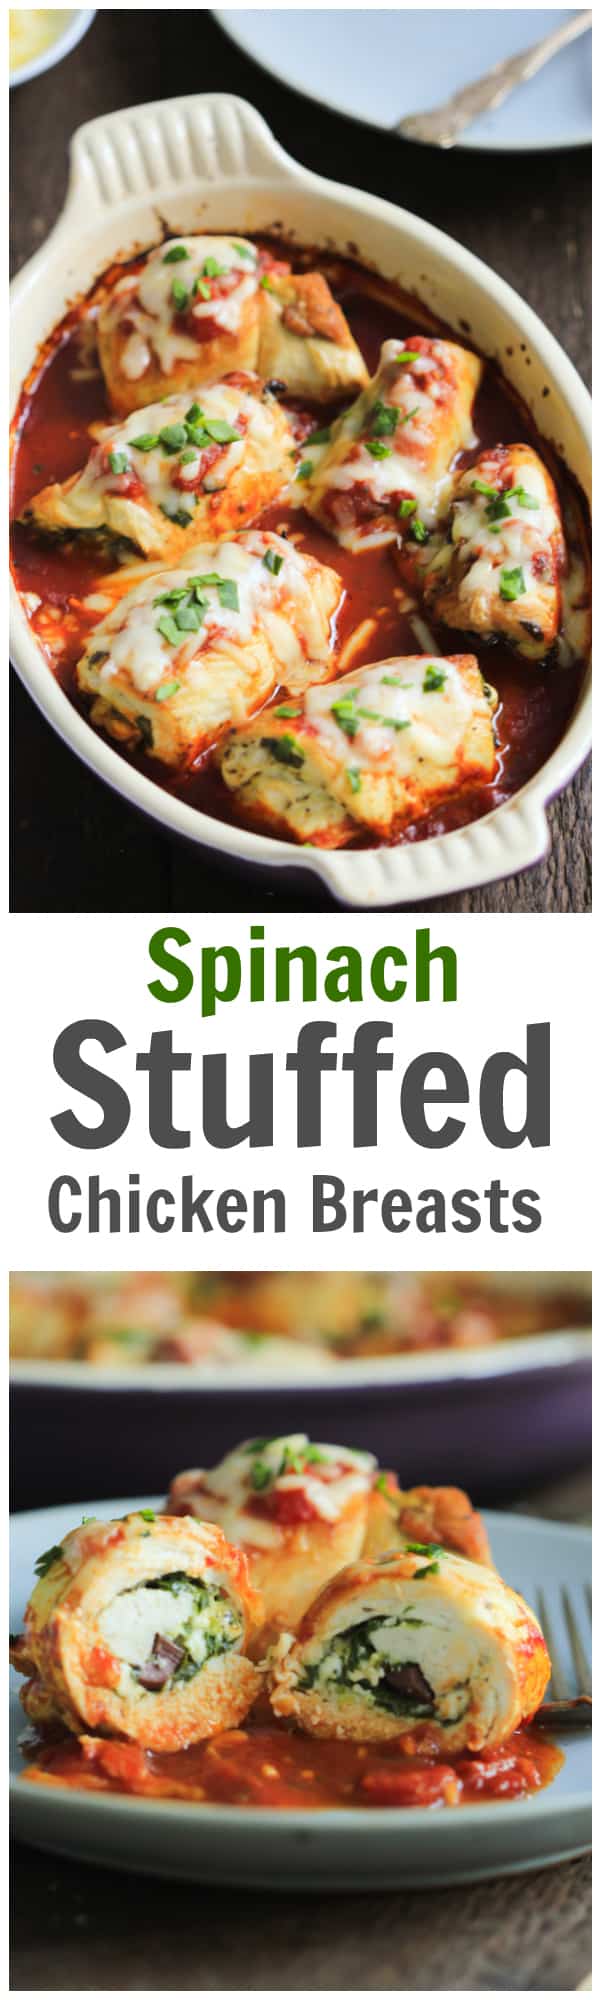  These Spinach and Feta Stuffed Chicken Breasts are baked, easy to make, low-carb, gluten-free and very flavourful. | www.primaverakitchen.com